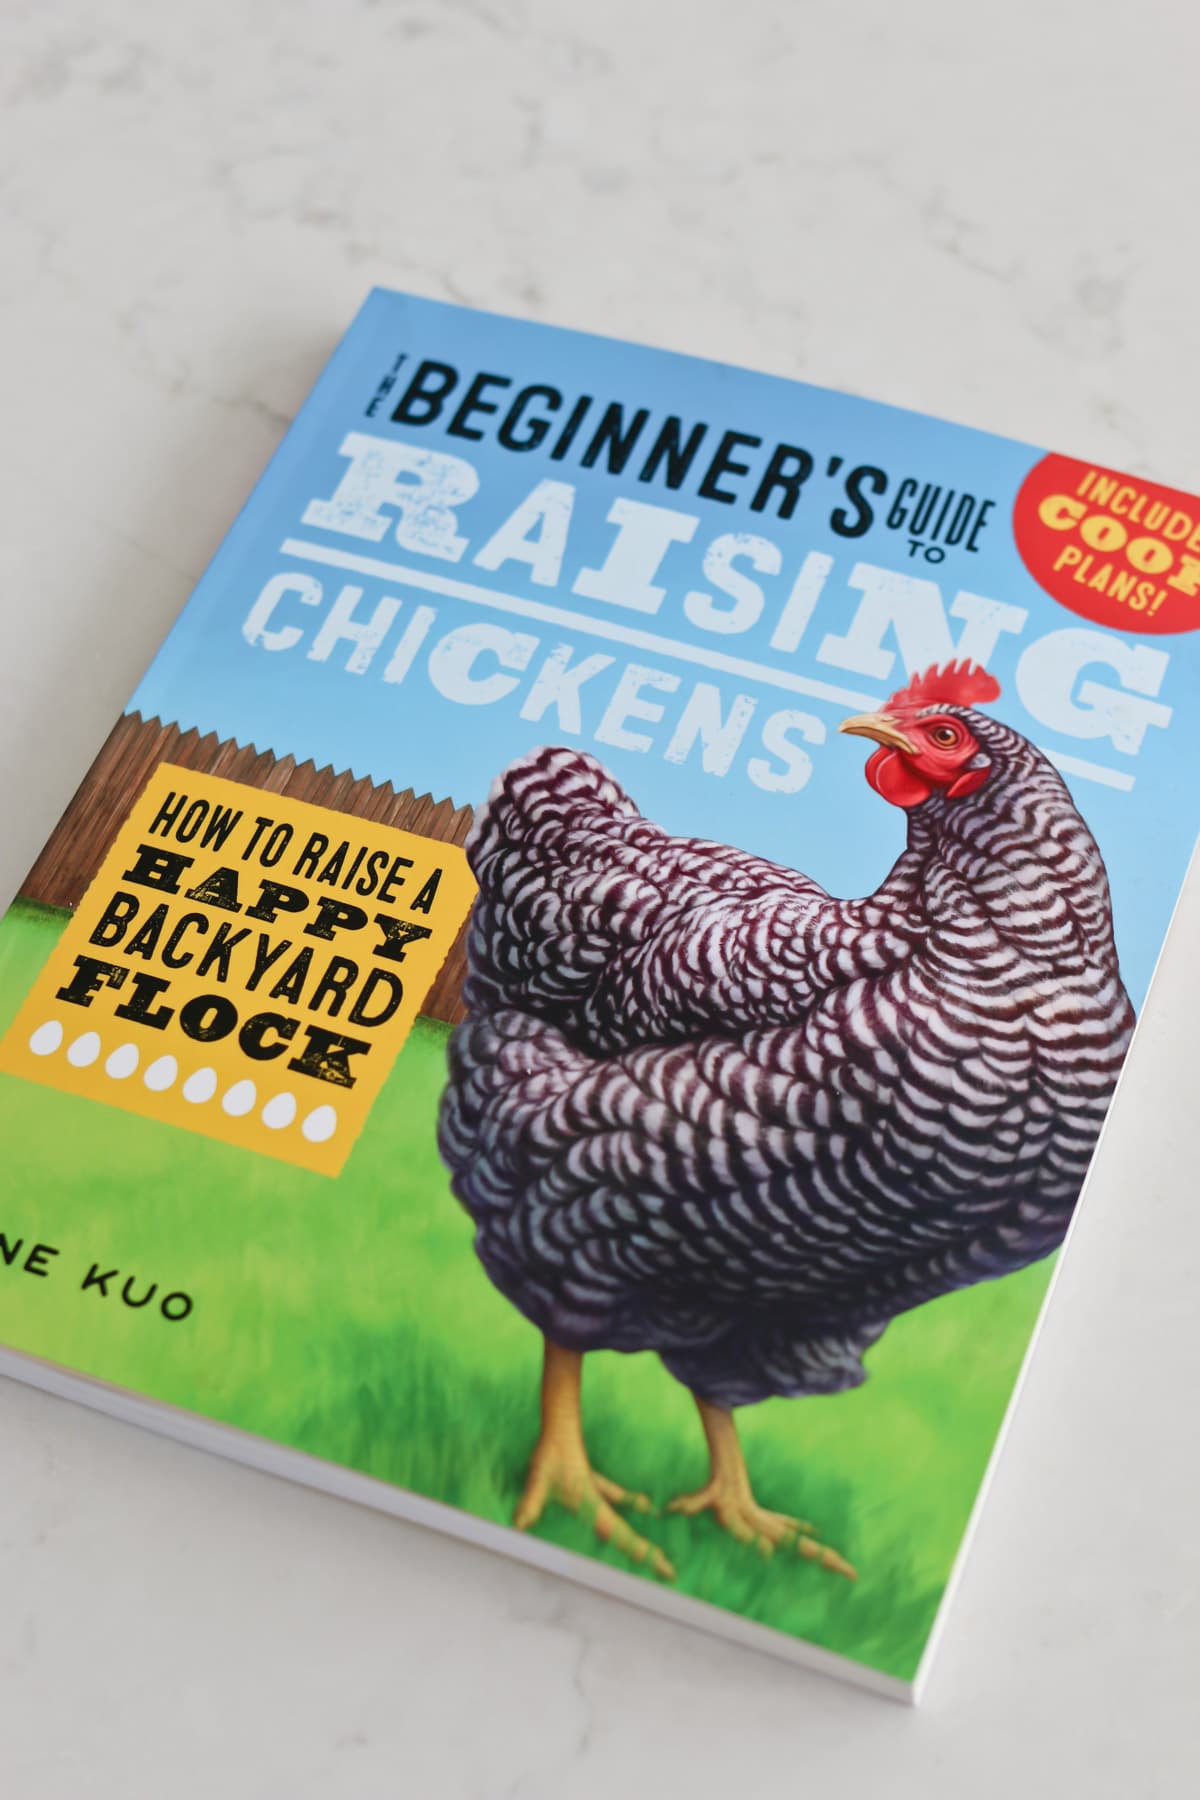 Beginners Guide to Raising Chickens Book